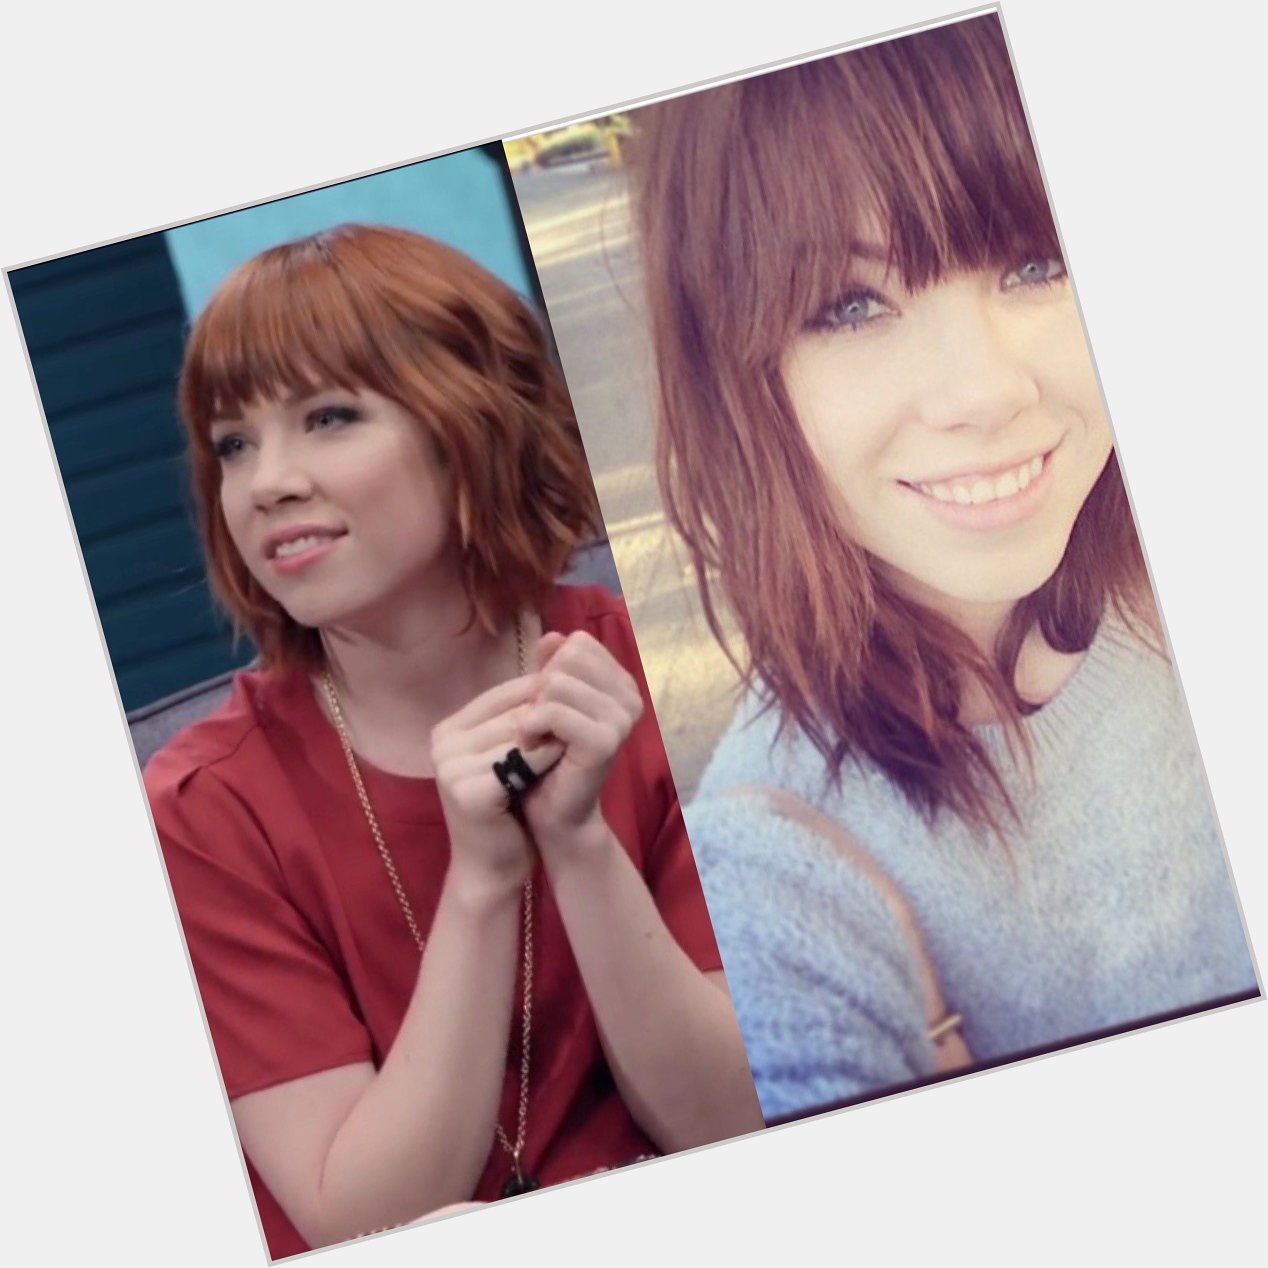 Happy birthday to the most beautiful 30 year old in the world---Carly Rae Jepsen 